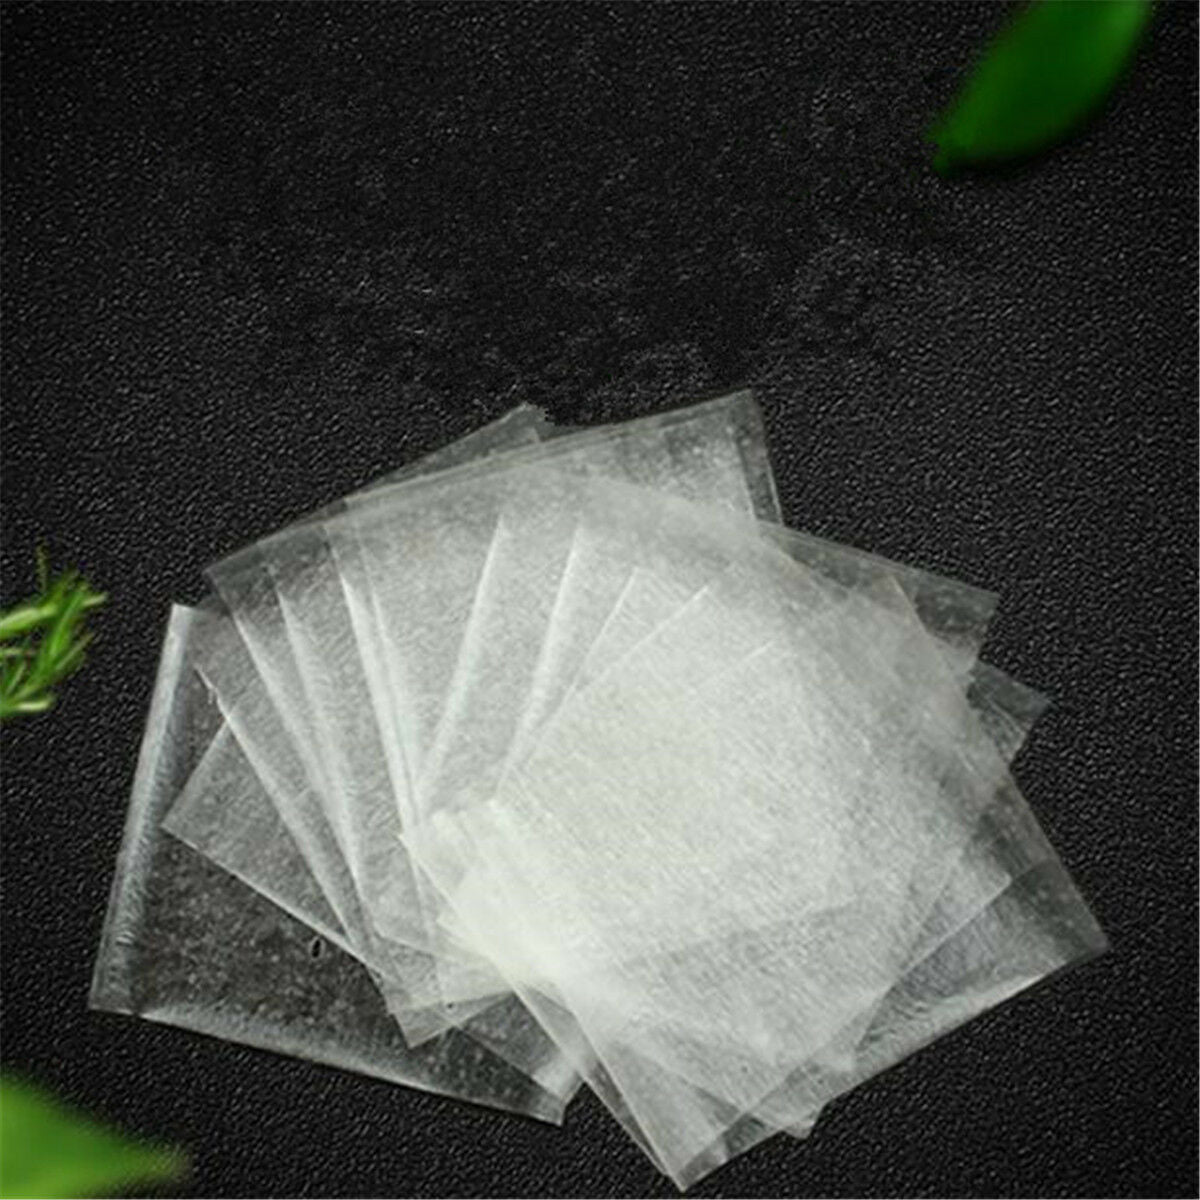 500 Sheets Edible Glutinous Rice Paper Xmas Wedding Candy Food Sweets Wrapping